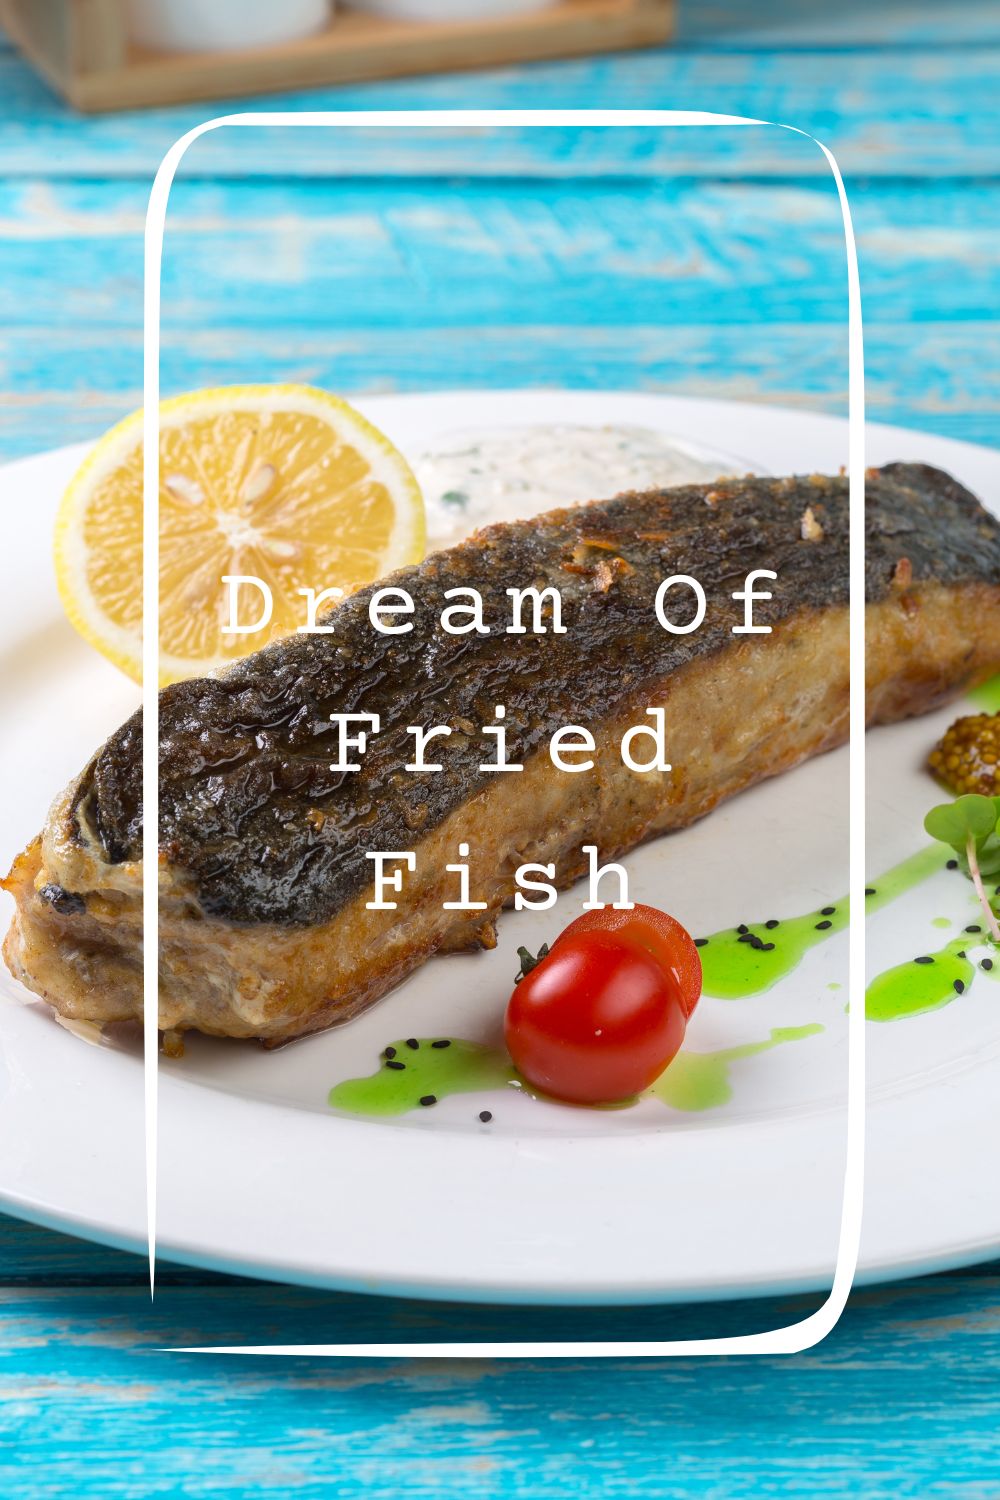 Dream Of Fried Fish Meanings 1